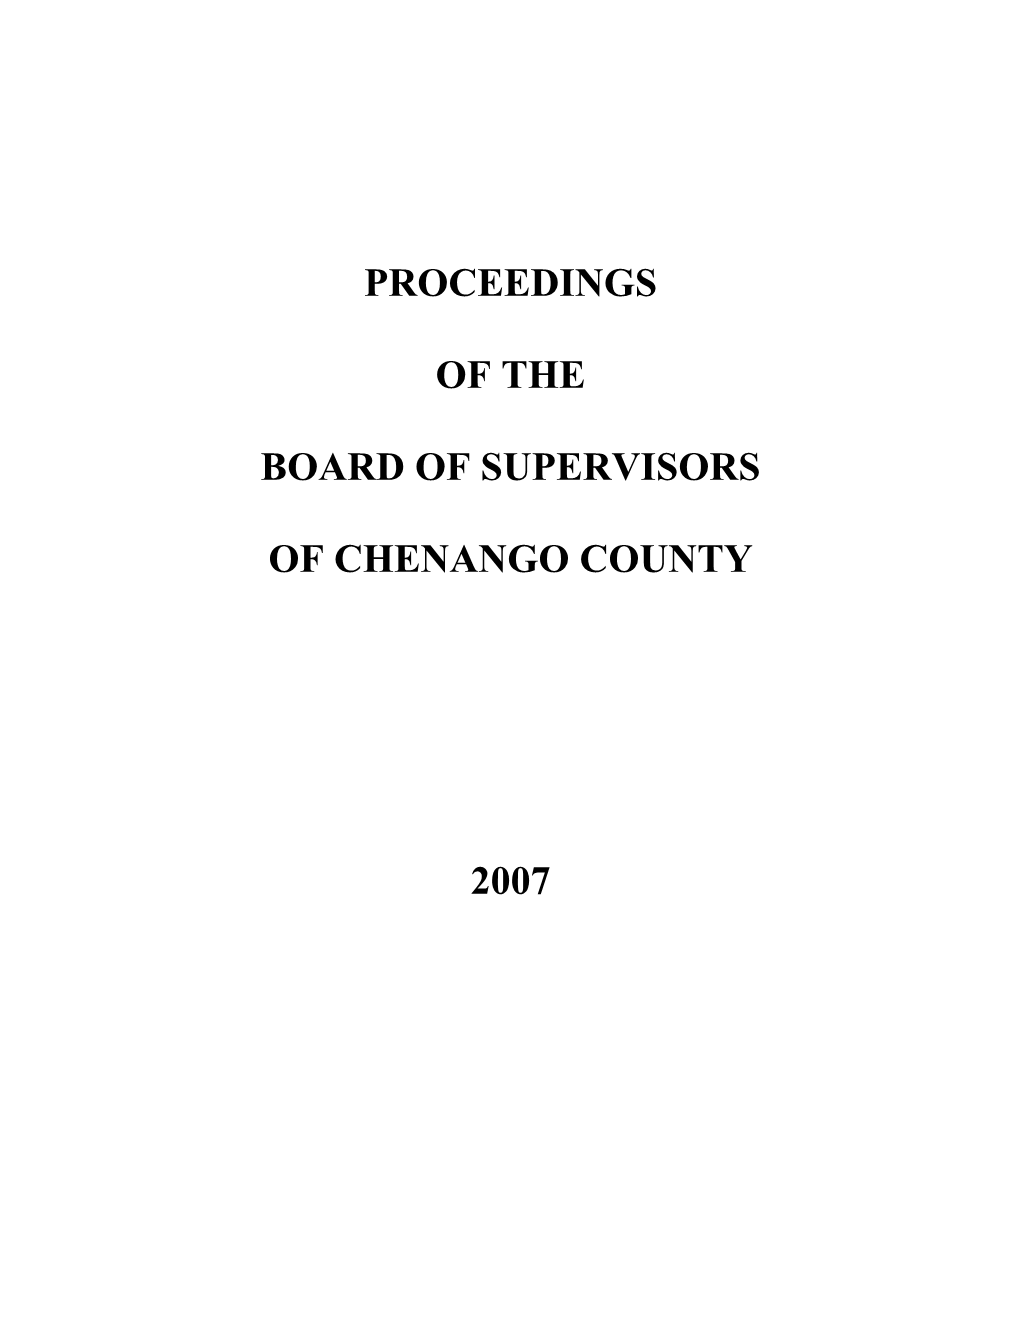 Proceedings of the Board of Supervisors of Chenango